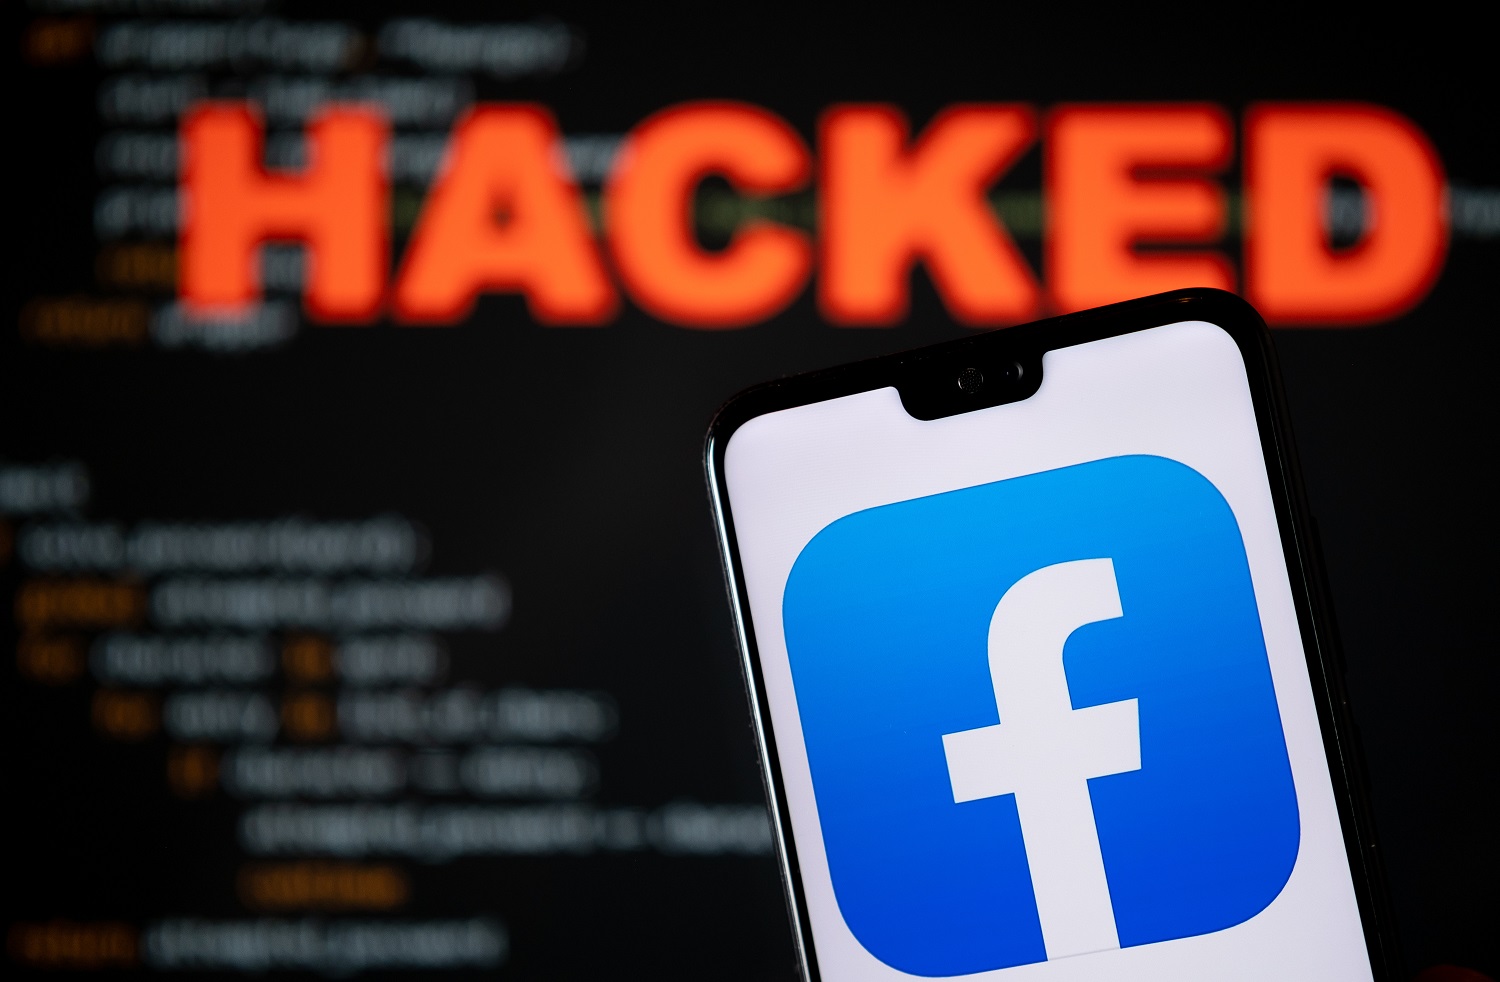 You can hack a Facebook account in minutes